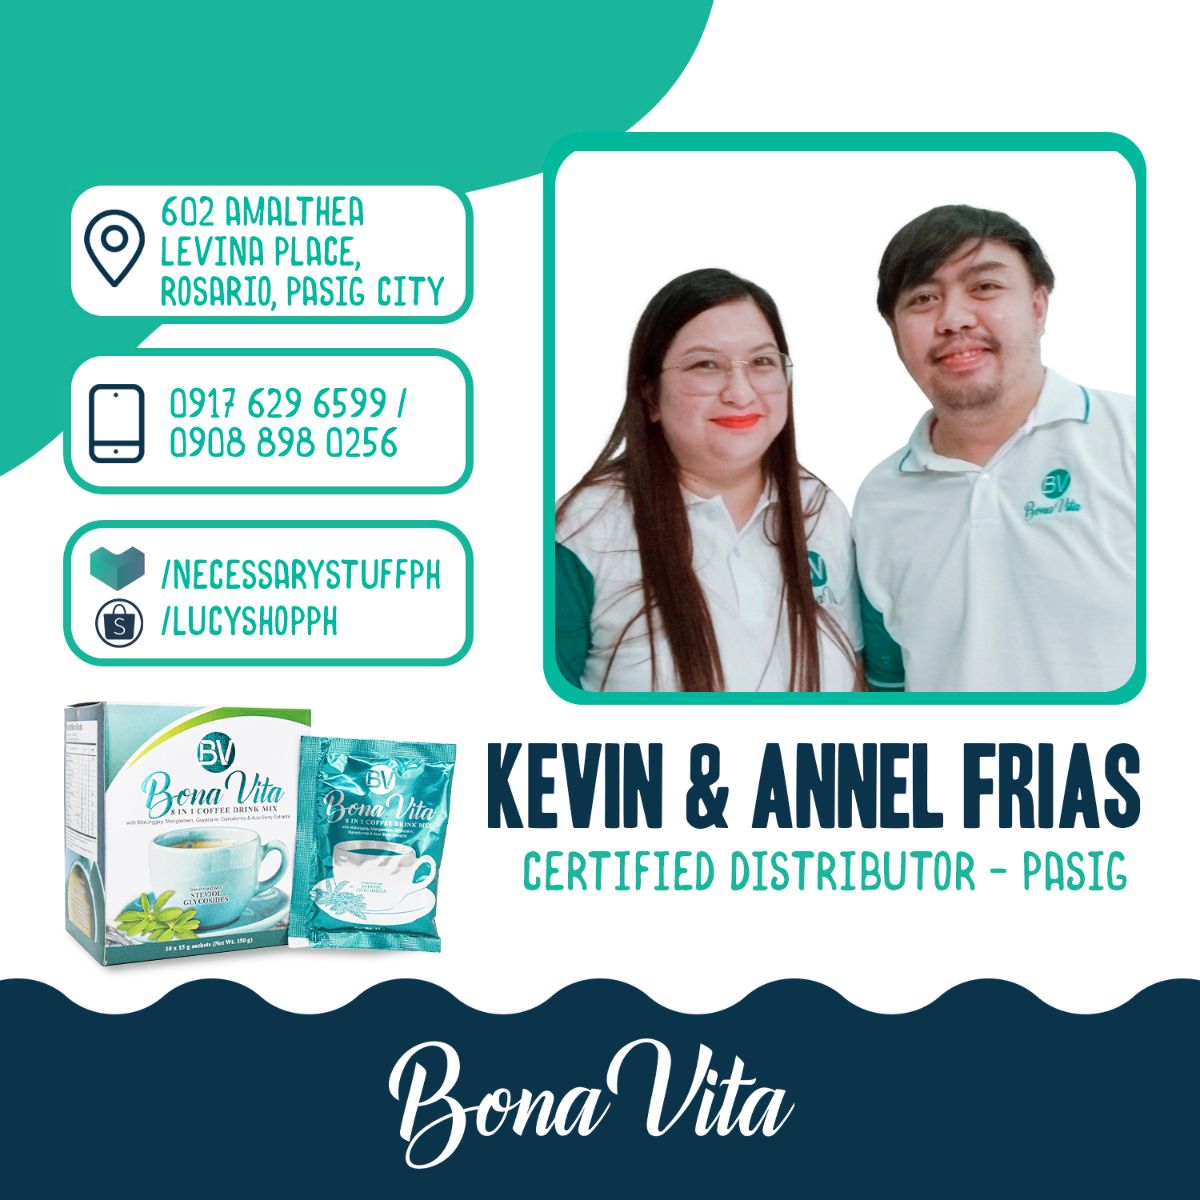 Kevin & Annel Frias